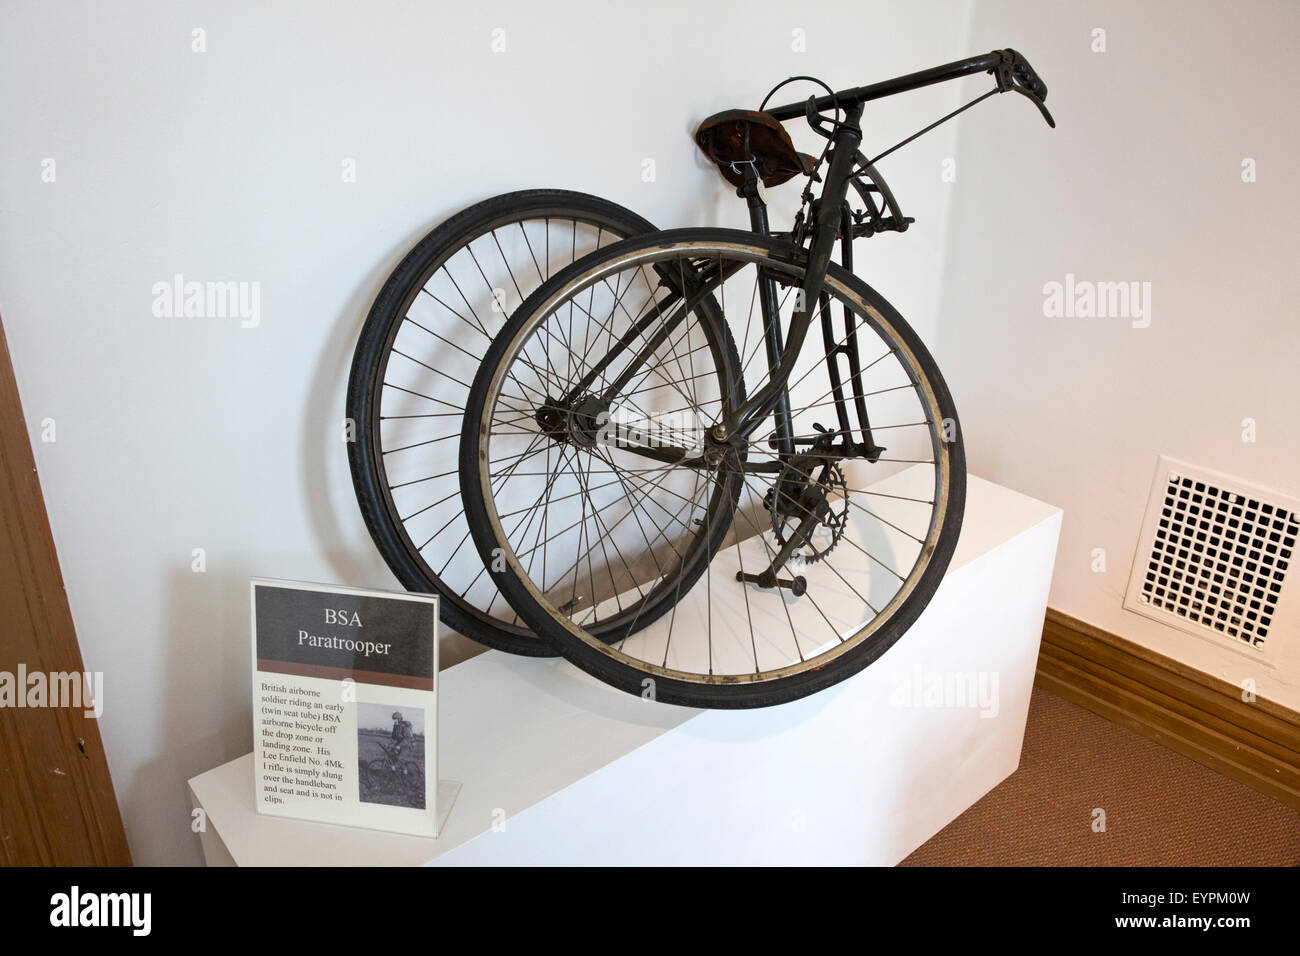 BSA Paratrooper folding bicycle for World War 2 British soldiers, displayed at the Bicycle Museum of America in New Bremen, Ohio Stock Photo